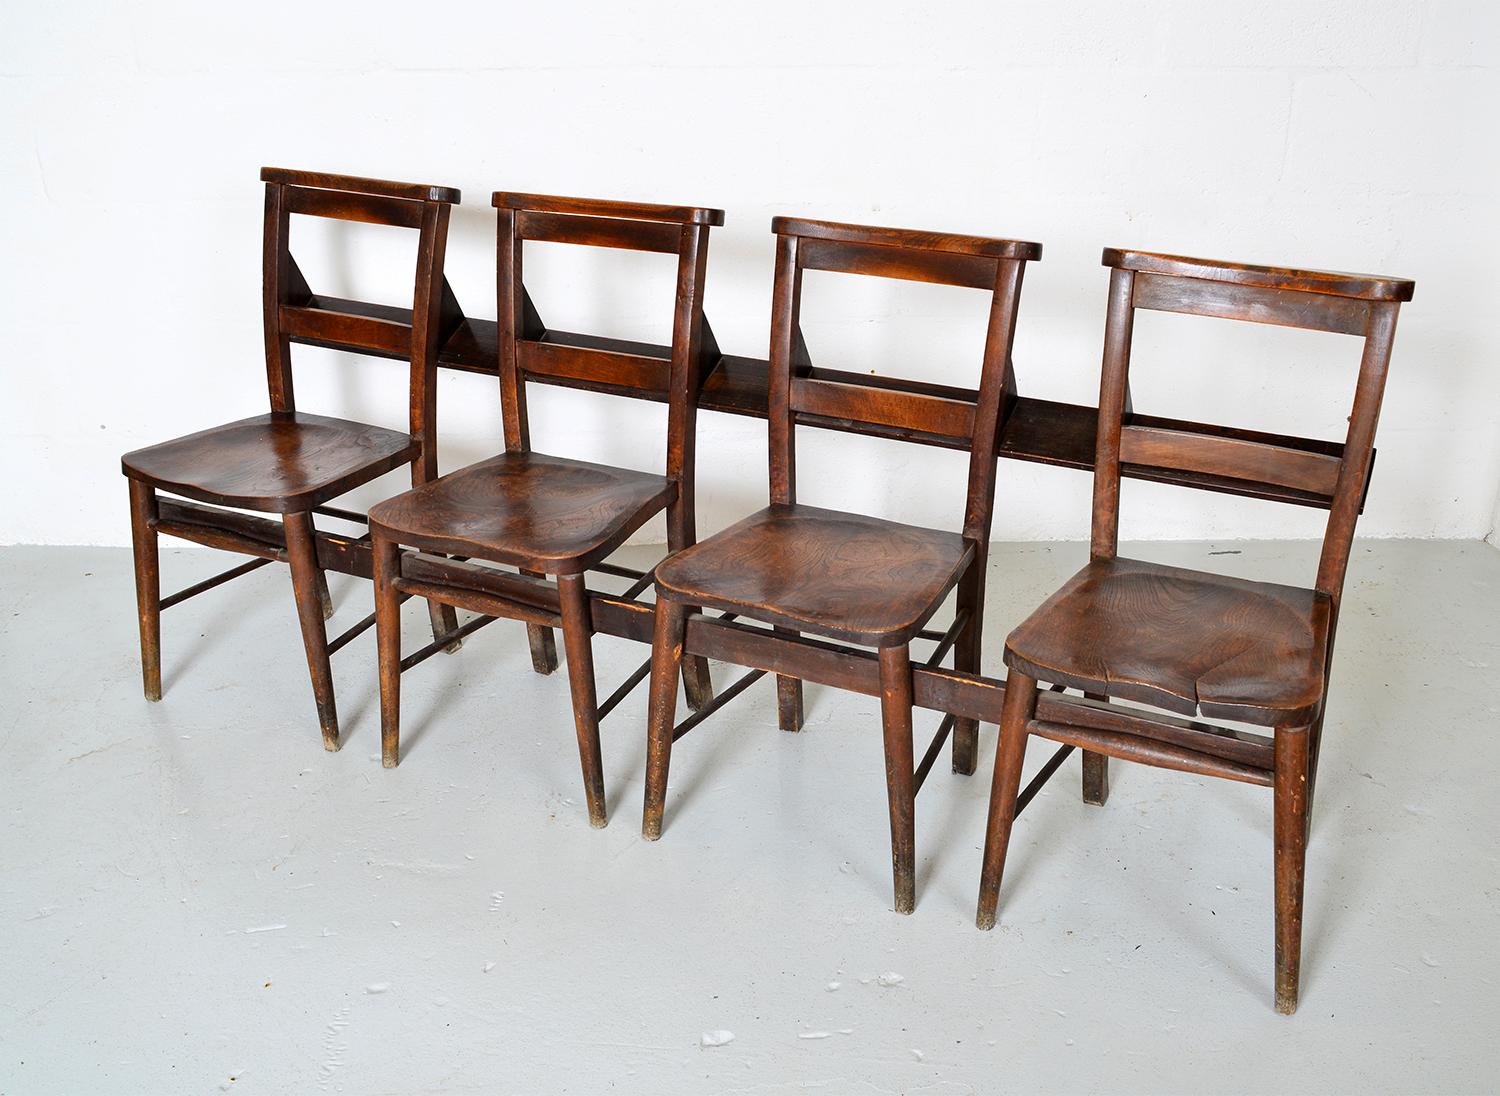 Bank of Estate made, Country House boot room chairs. The 4 Chapel chairs were once repurposed by the Estate carpenter into a bank of chairs / bench, which was used in the boot room of a Country House in Dorset. 
The shelves at the back would once